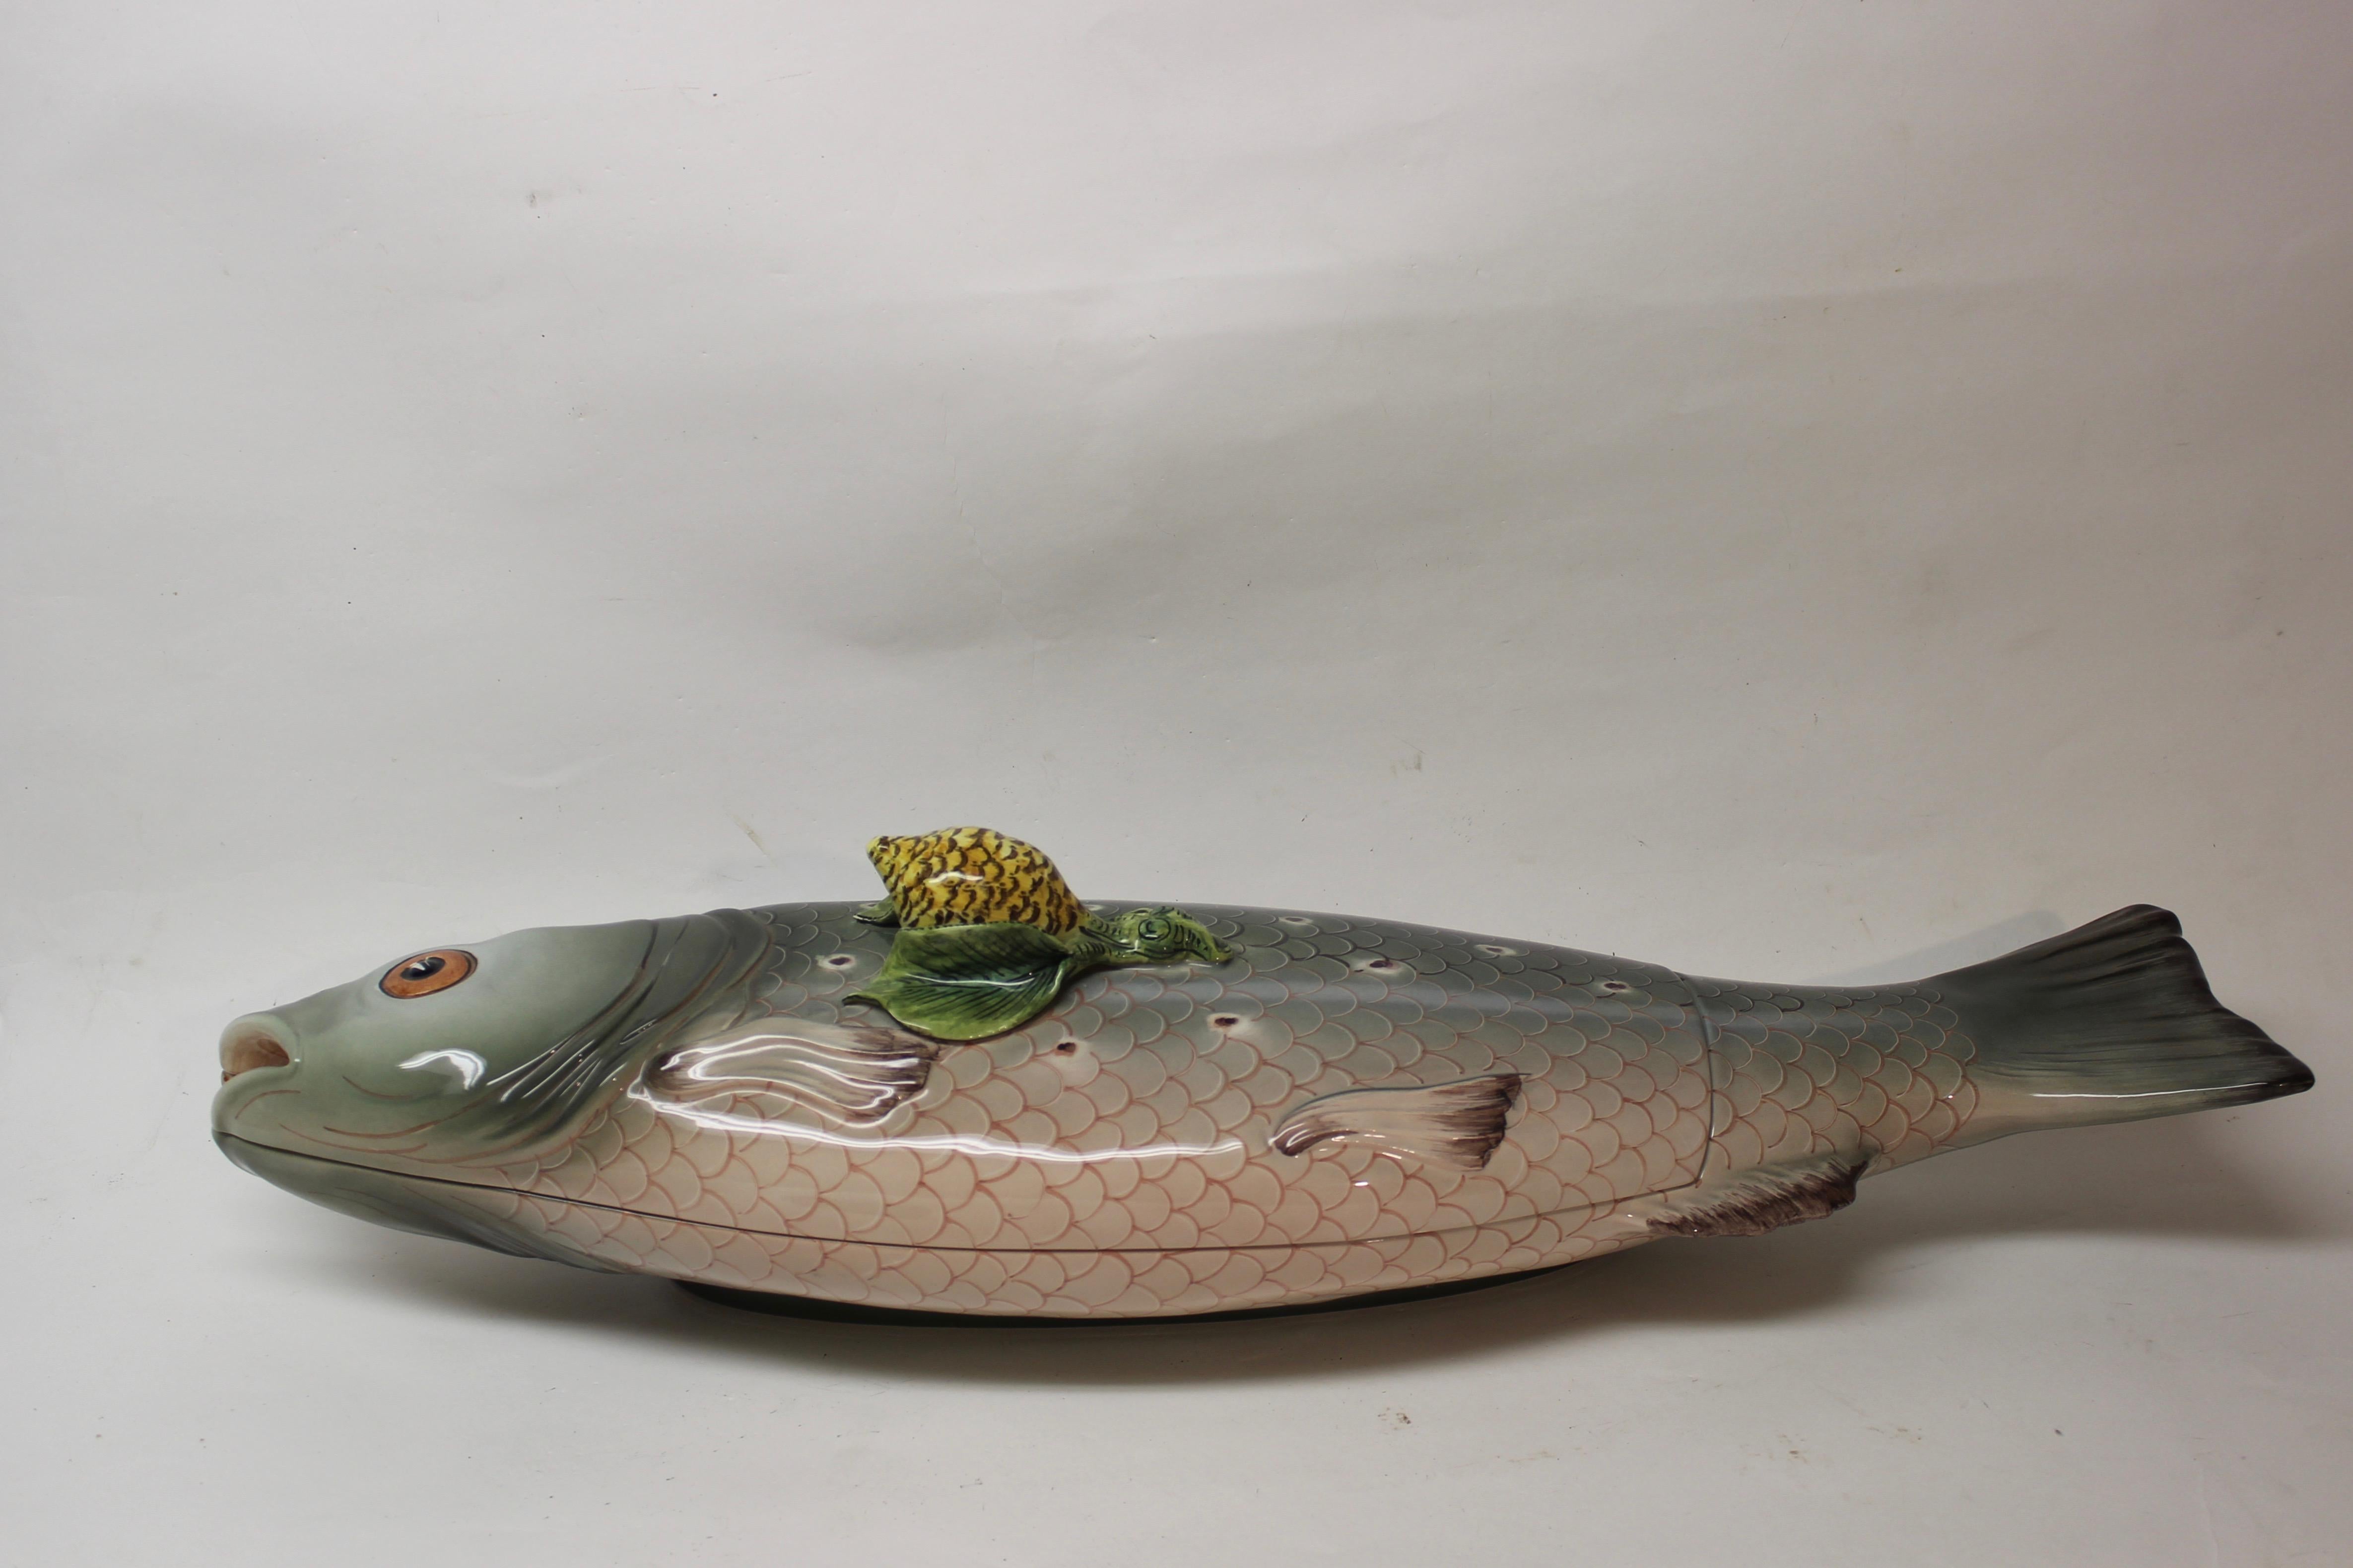 Italian hand painted ceramic two-piece fish serving dish. Made by Nove for Tiffany's. Majolica style, mint condition...